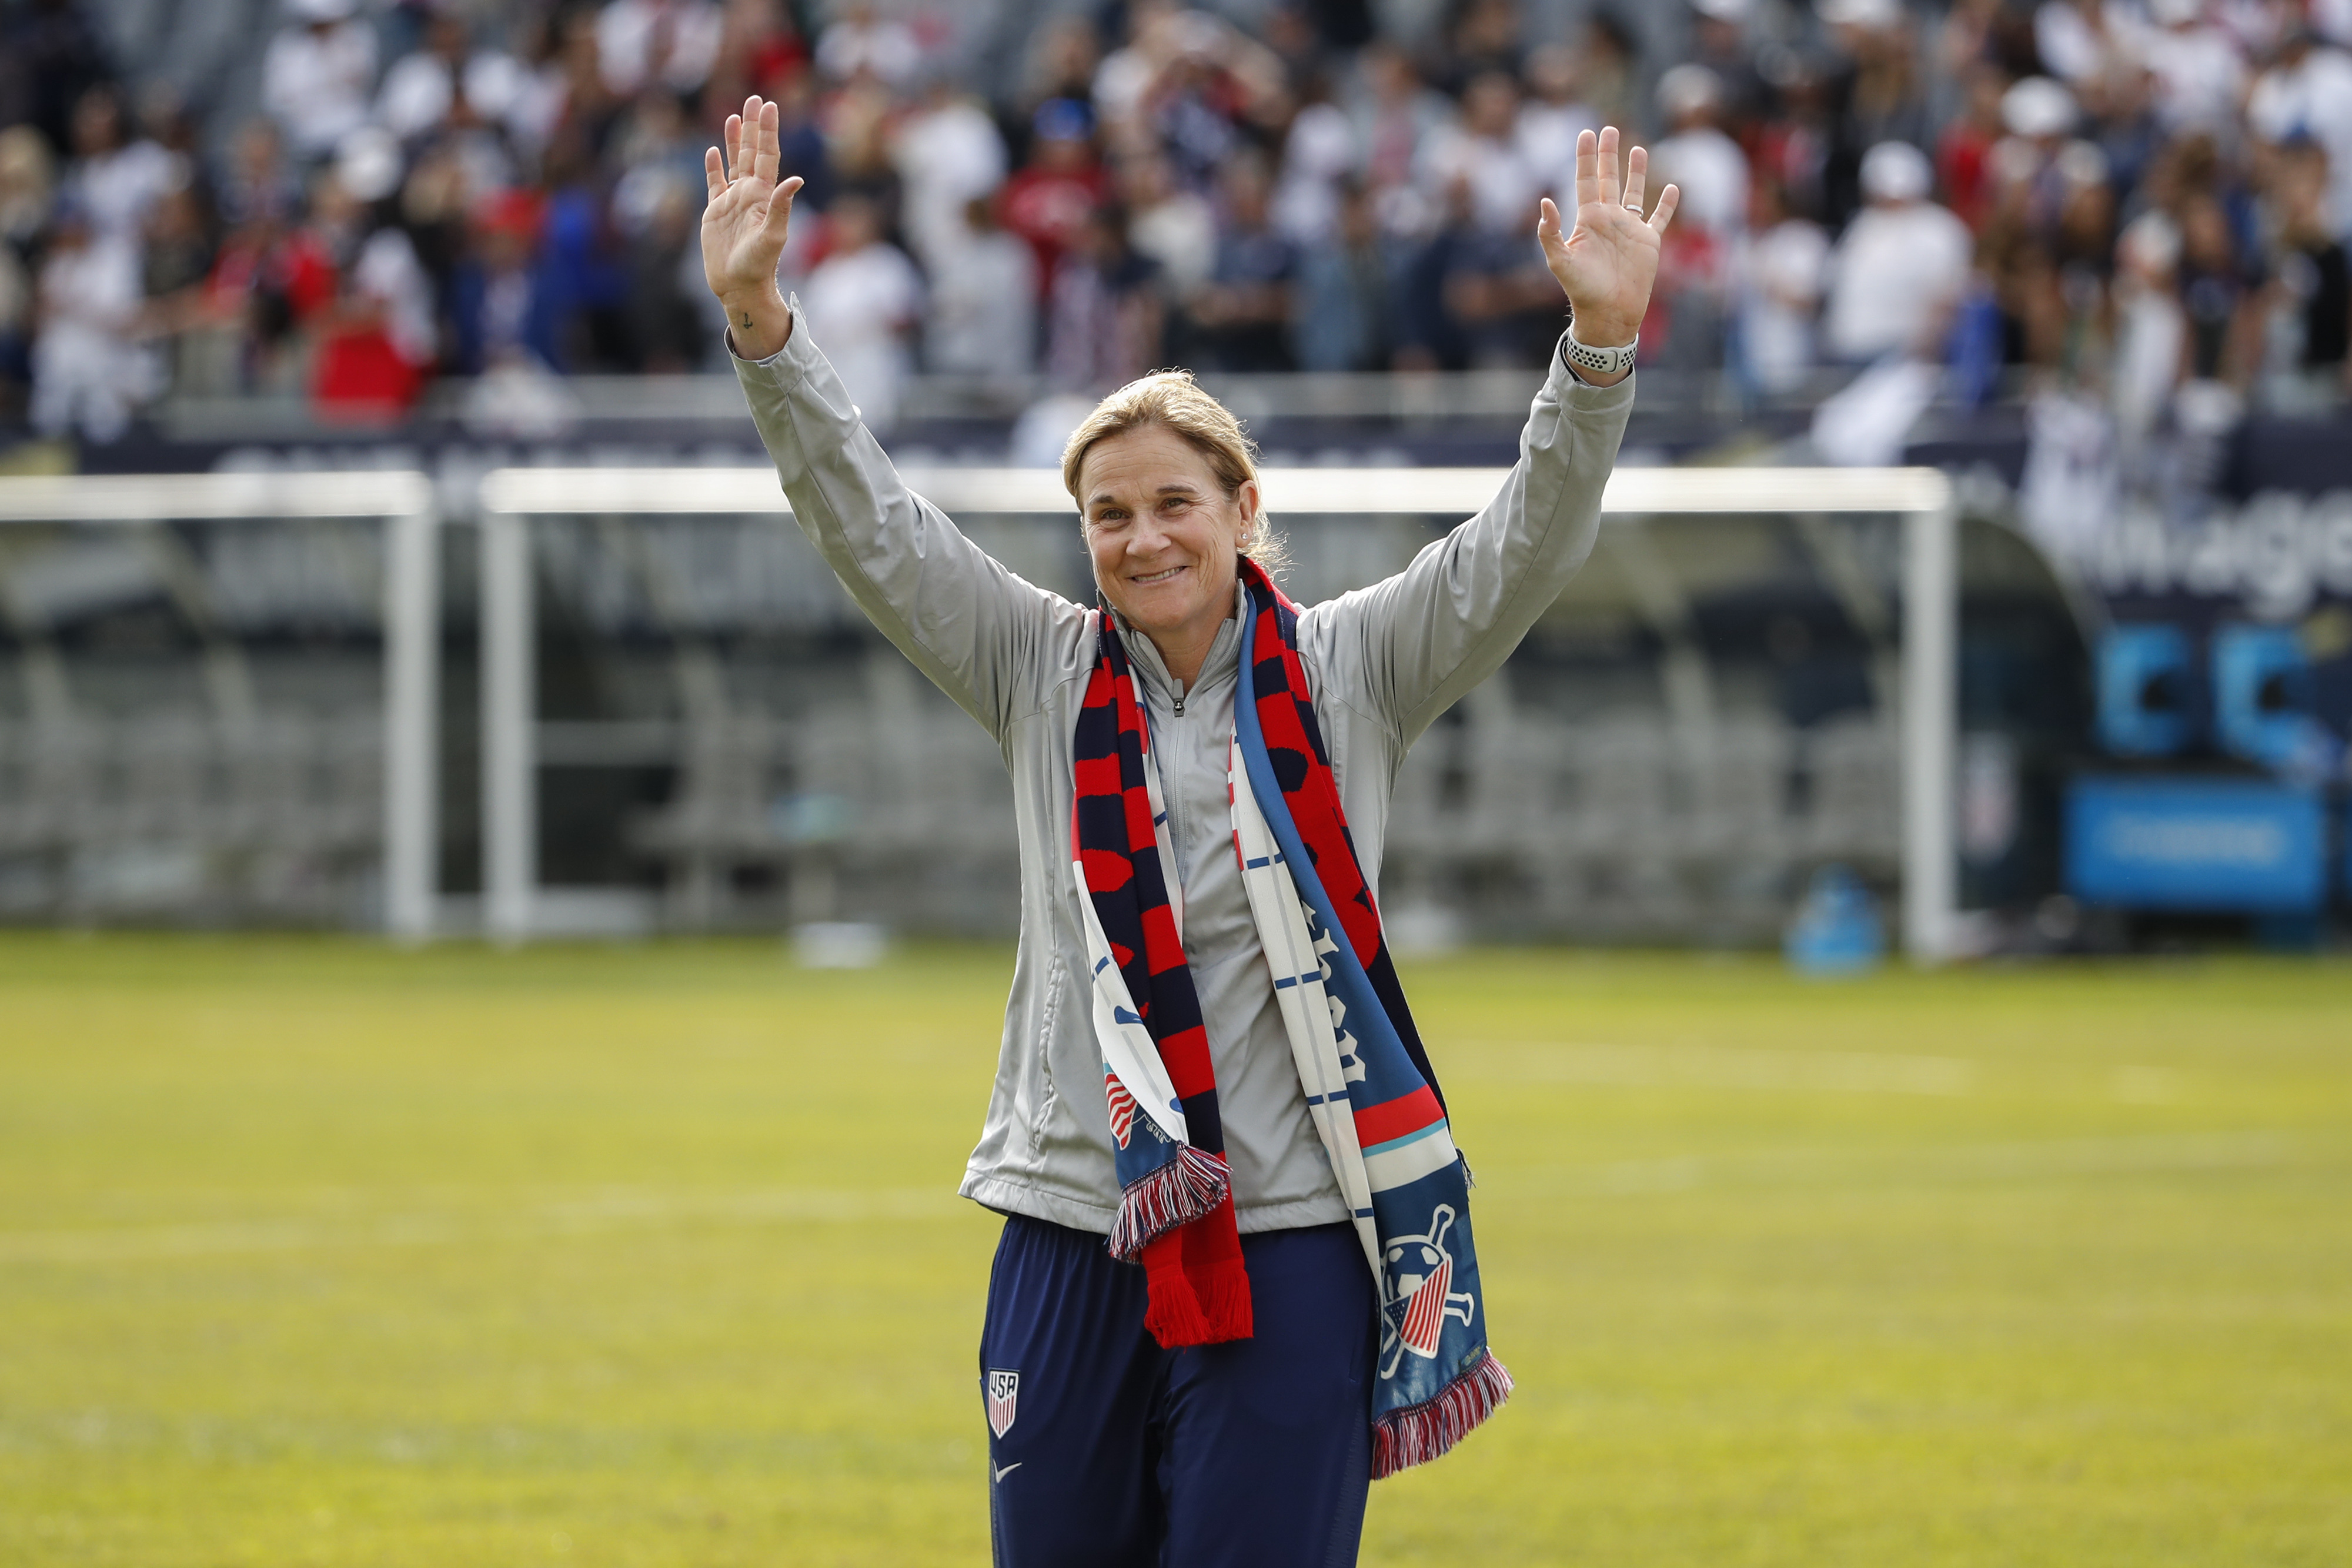 FILE - United States head coach Jill Ellis waves to the crowd as she leaves the field after an international friendly soccer match between the United States and South Korea, Sunday, Oct. 6, 2019, in Chicago. The San Diego Wave called accusations made by a former employee on social media “inaccurate and defamatory” in a statement on Wednesday, July 3, 2024. Brittany Alvarado, who says she is a former video and creative manger for the team, called on the National Women's Soccer League to remove to team President Jill Ellis, the former coach of the U.S. women's national team. (AP Photo/Kamil Krzaczynski, File)